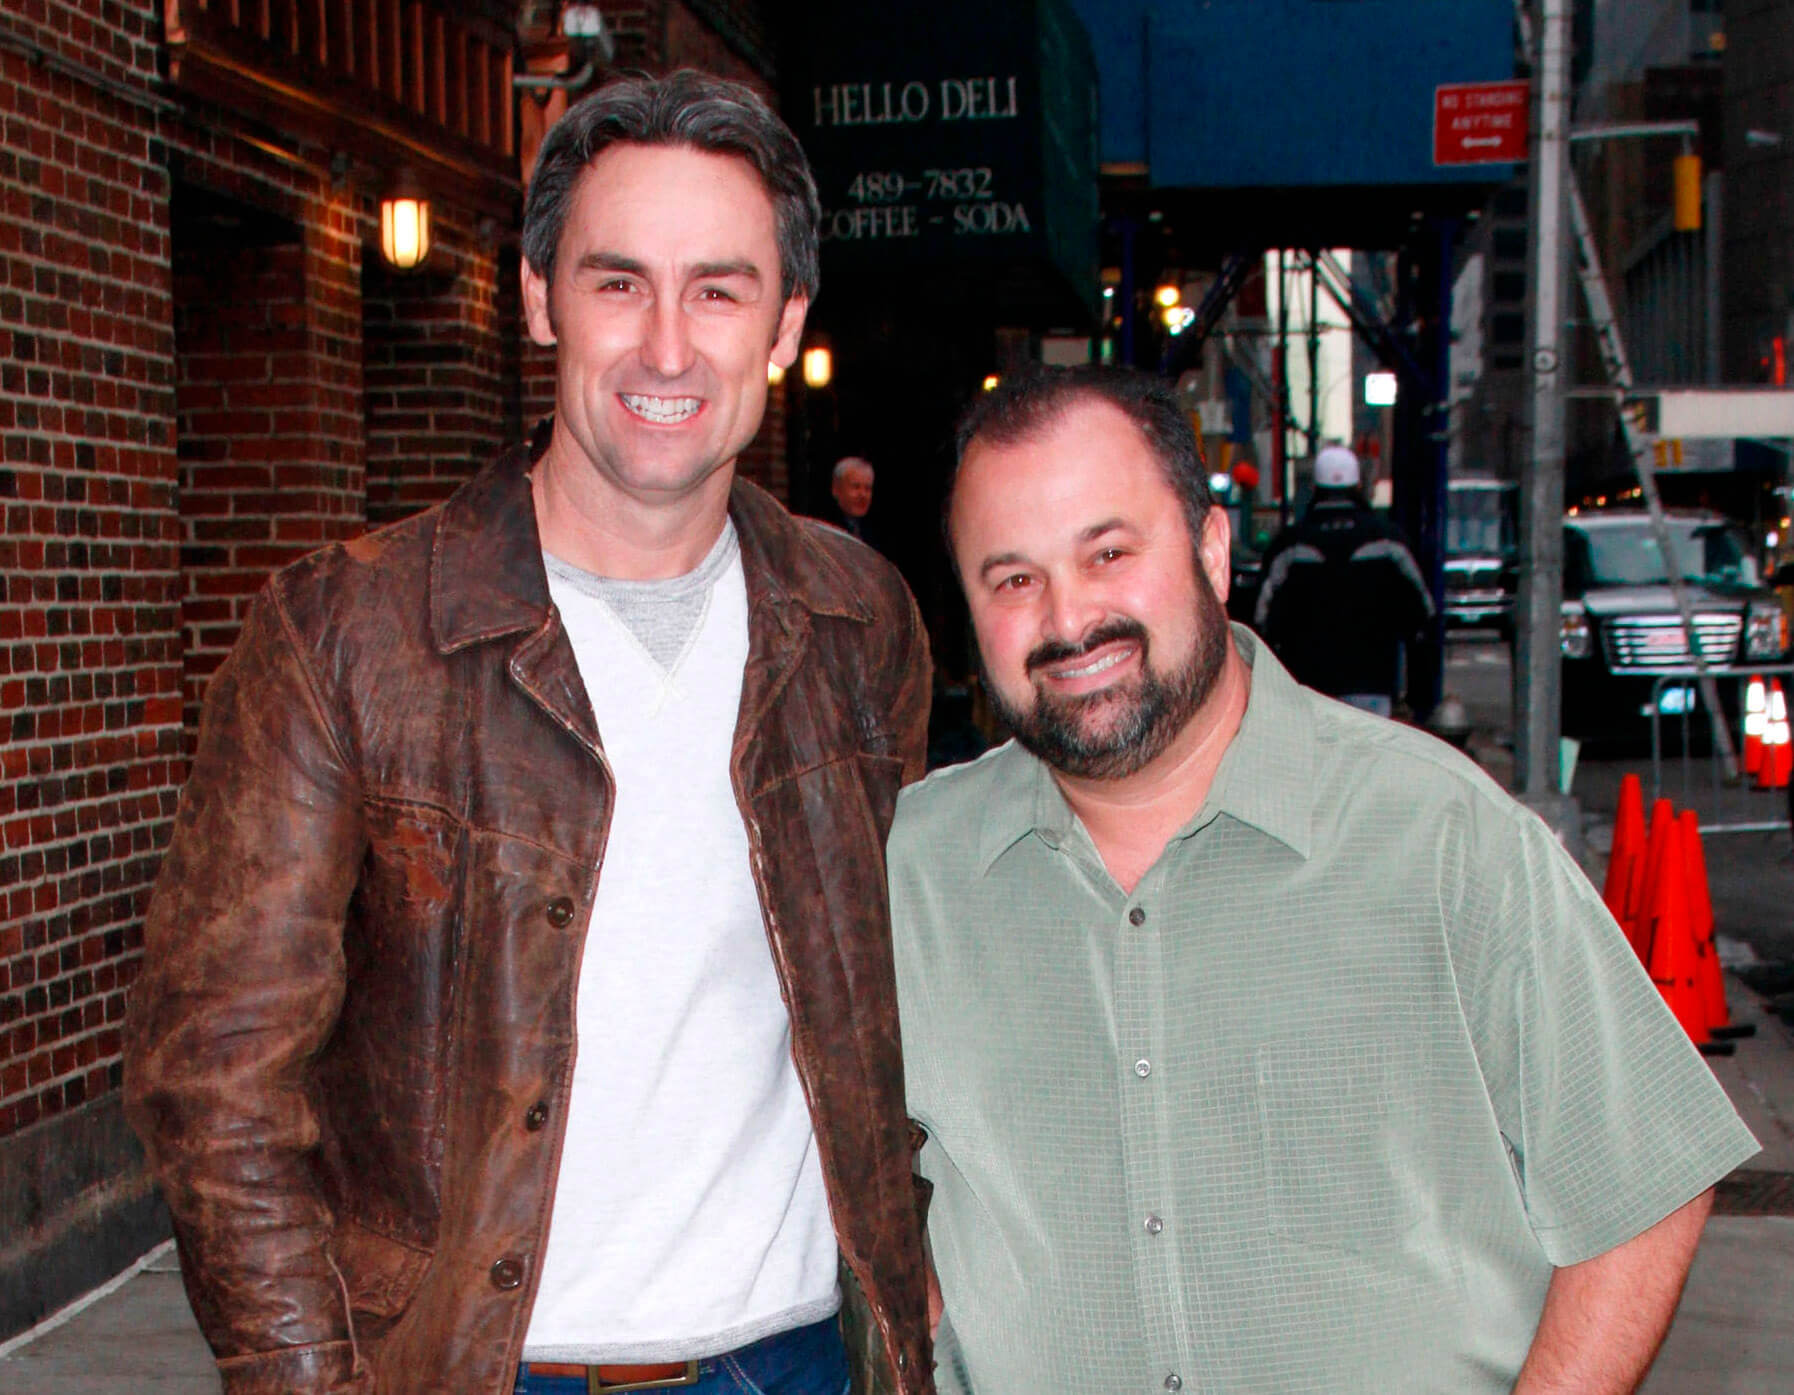 'American Pickers' stars Mike Wolfe and Frank Fritz standing next to each other and smiling